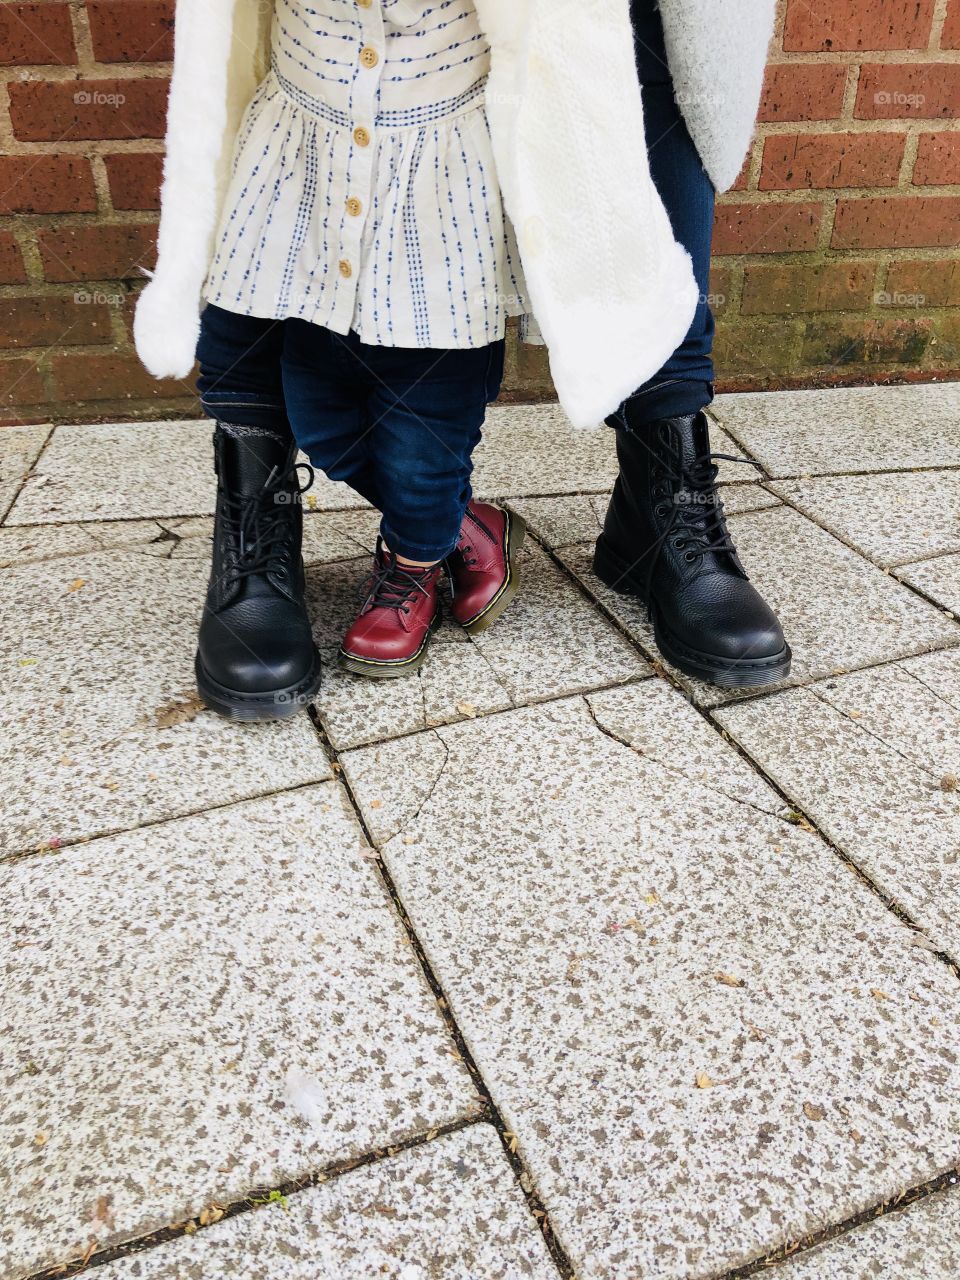 Mommy and me matching shoes. Daughter and I were stomping around downtown Portland in our docs. Love the color of her shoes against the brick wall. 